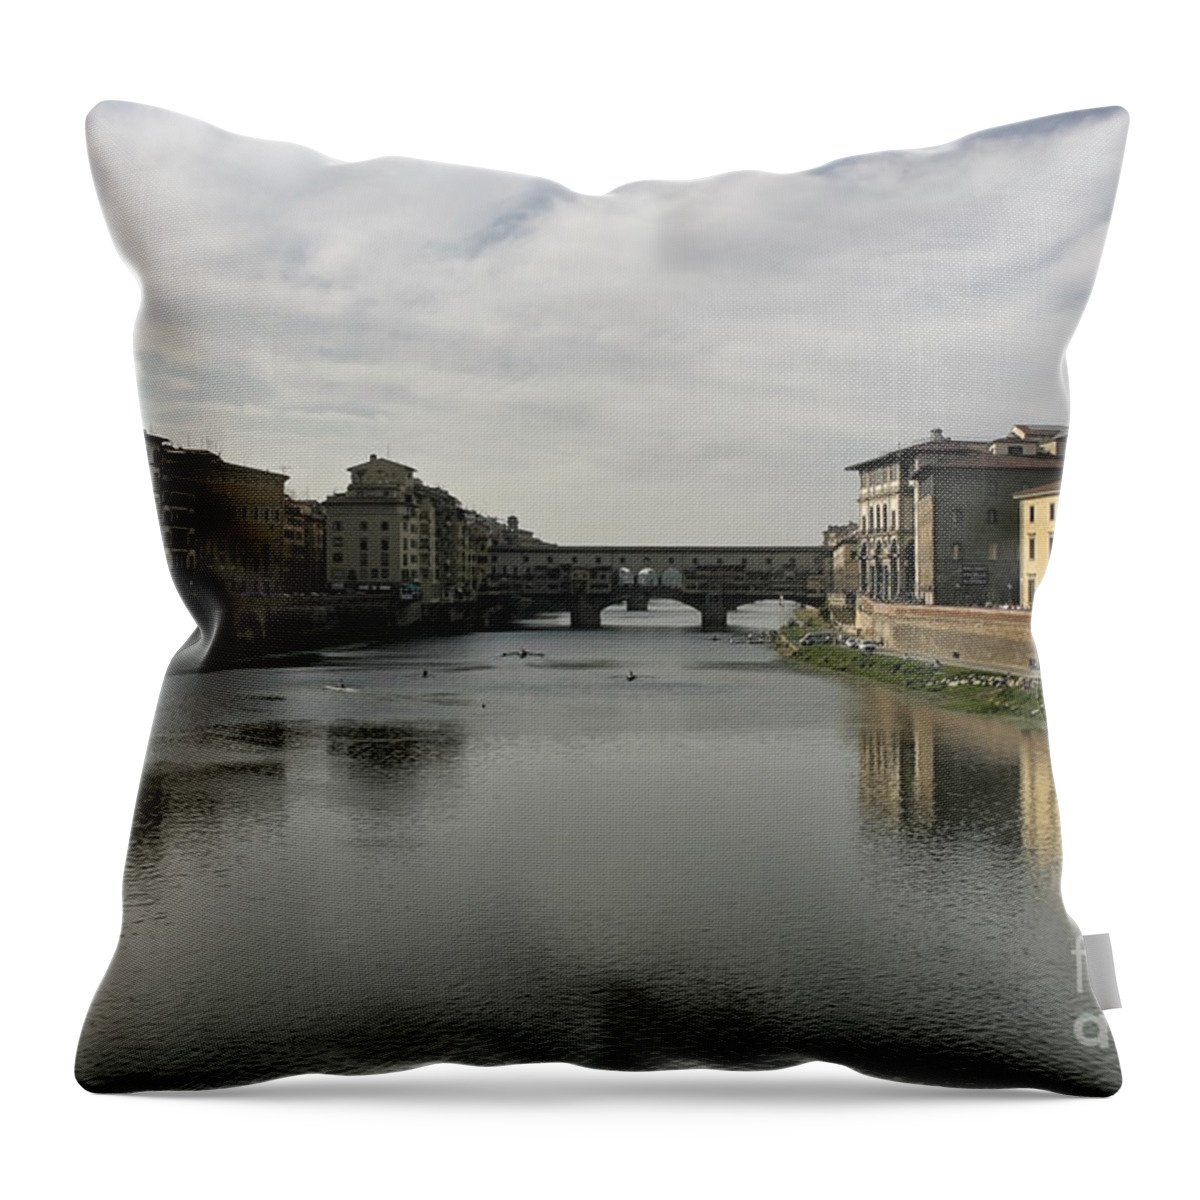 Ancient Throw Pillow featuring the photograph Ponte Vecchio by Belinda Greb